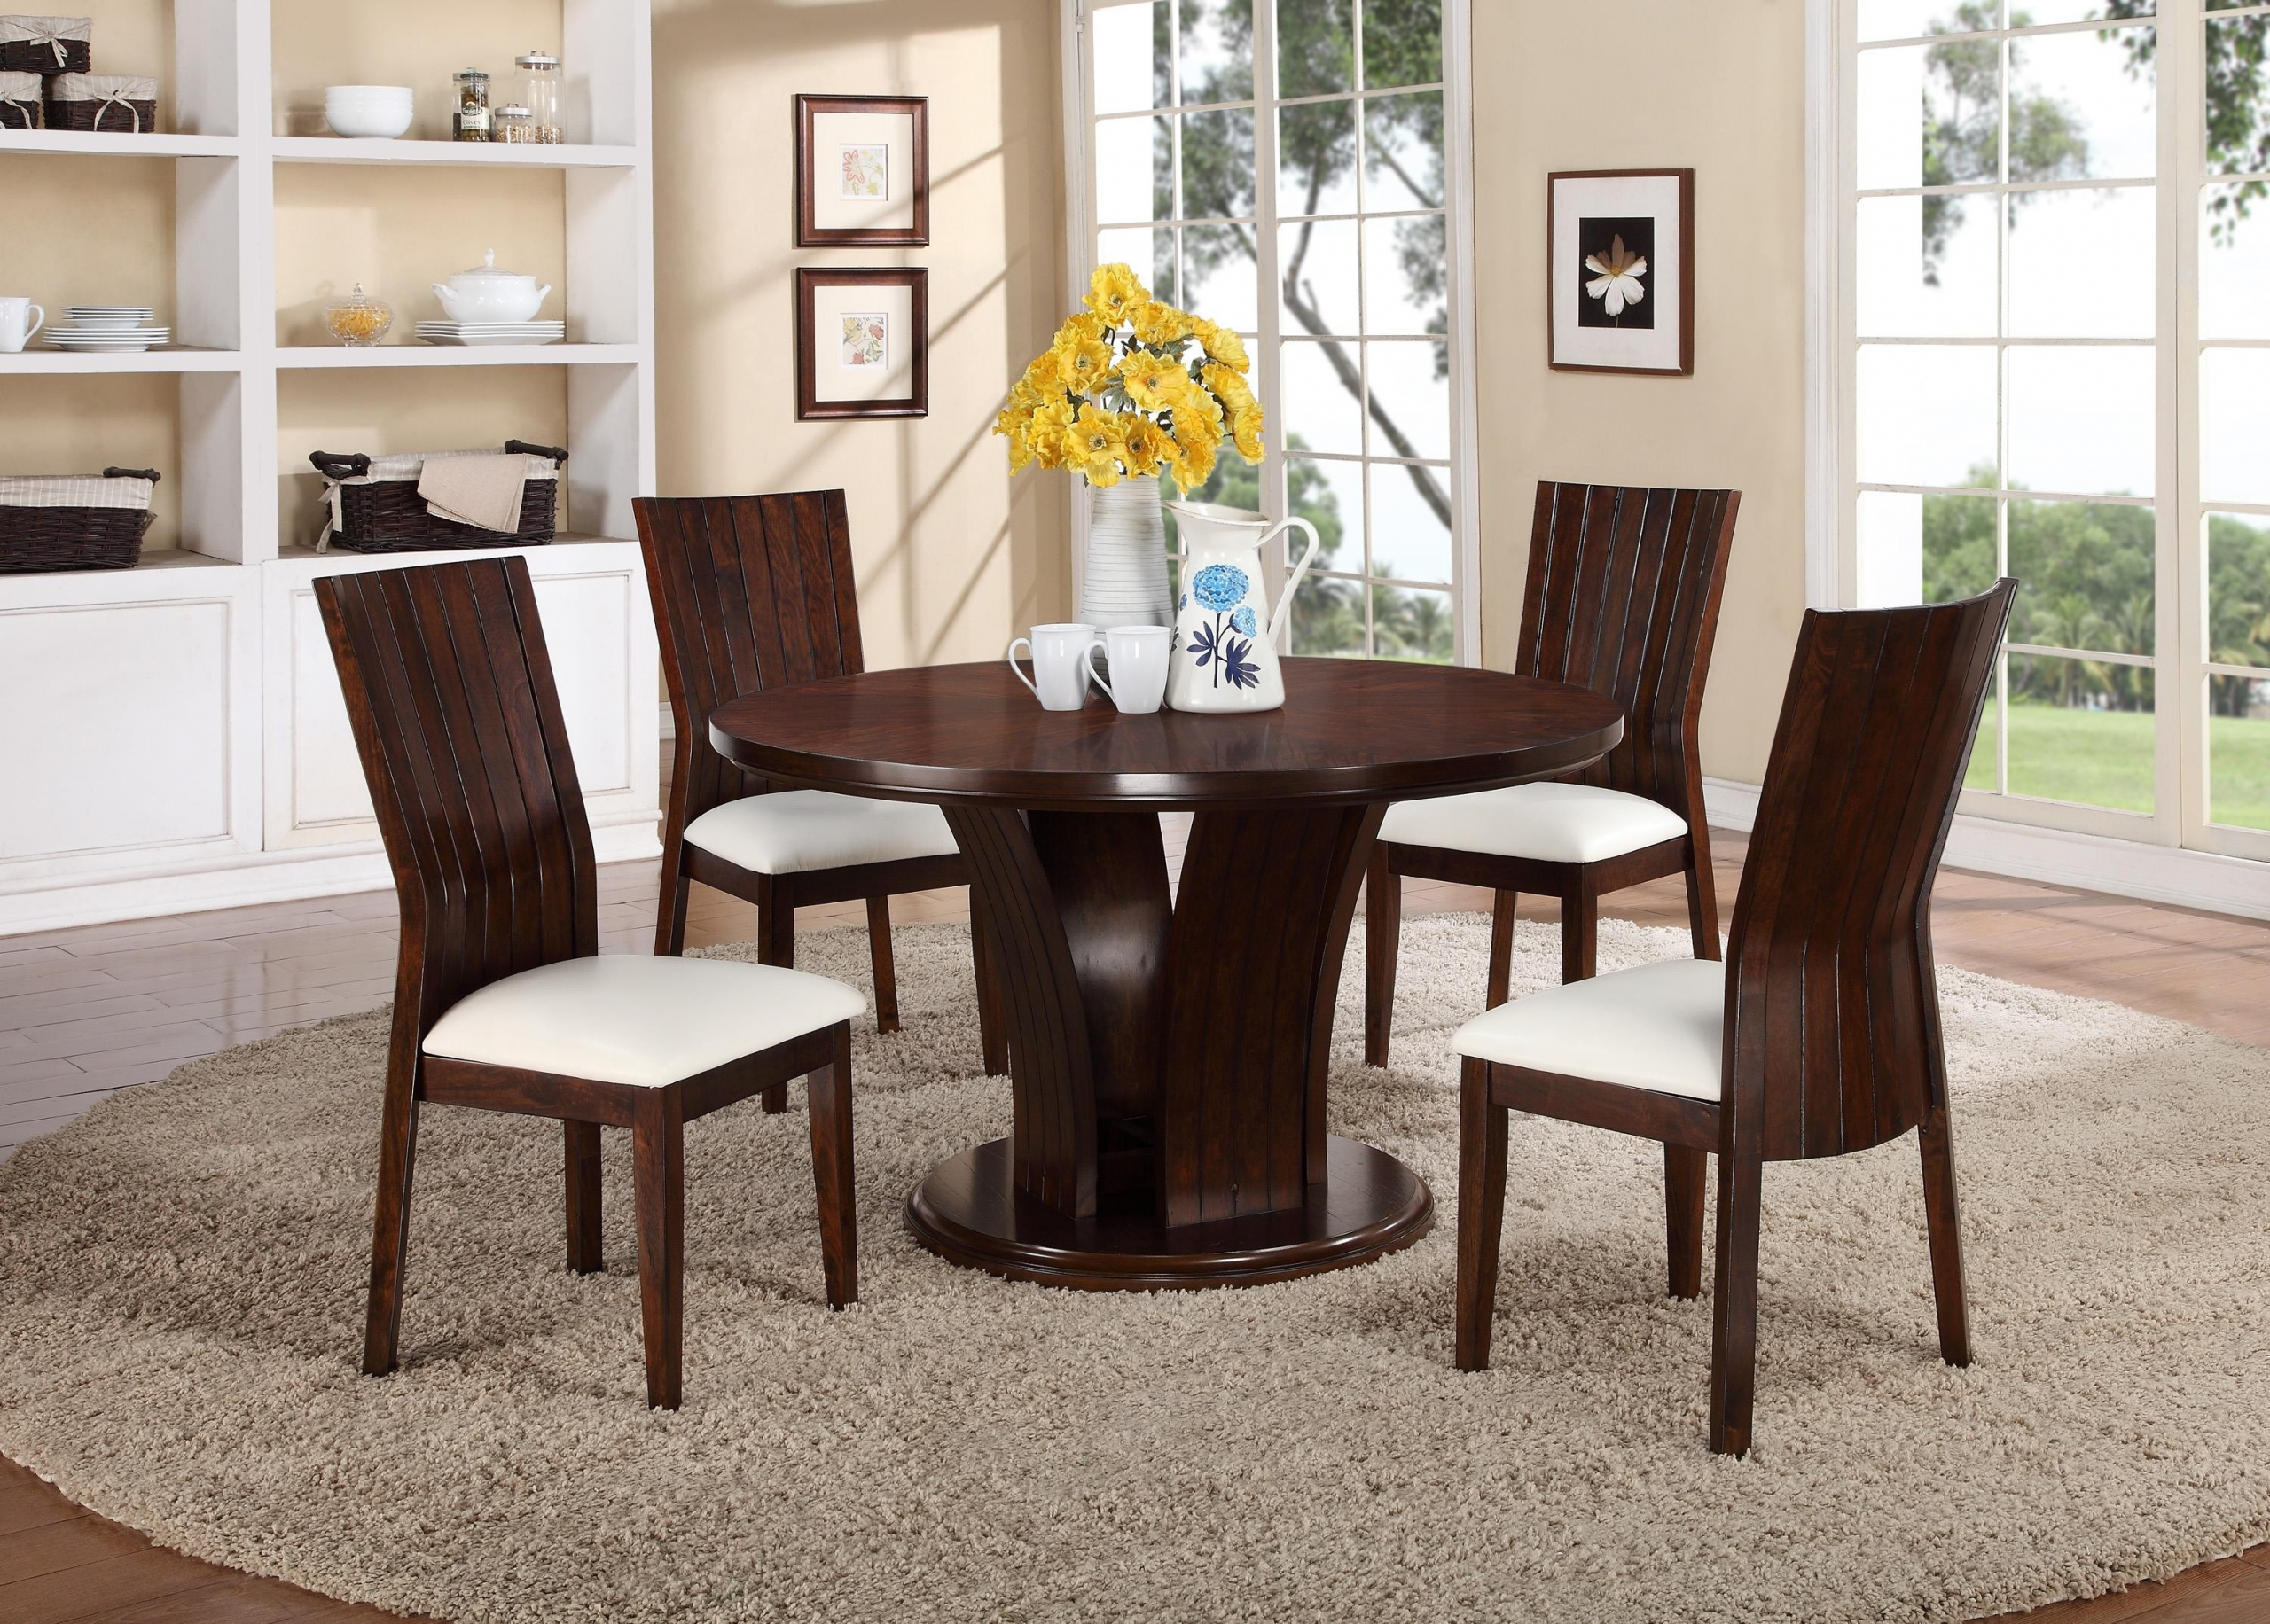 Round Dining Table Kijiji Ottawa Archives Masclientesmx New with dimensions 3000 X 2147